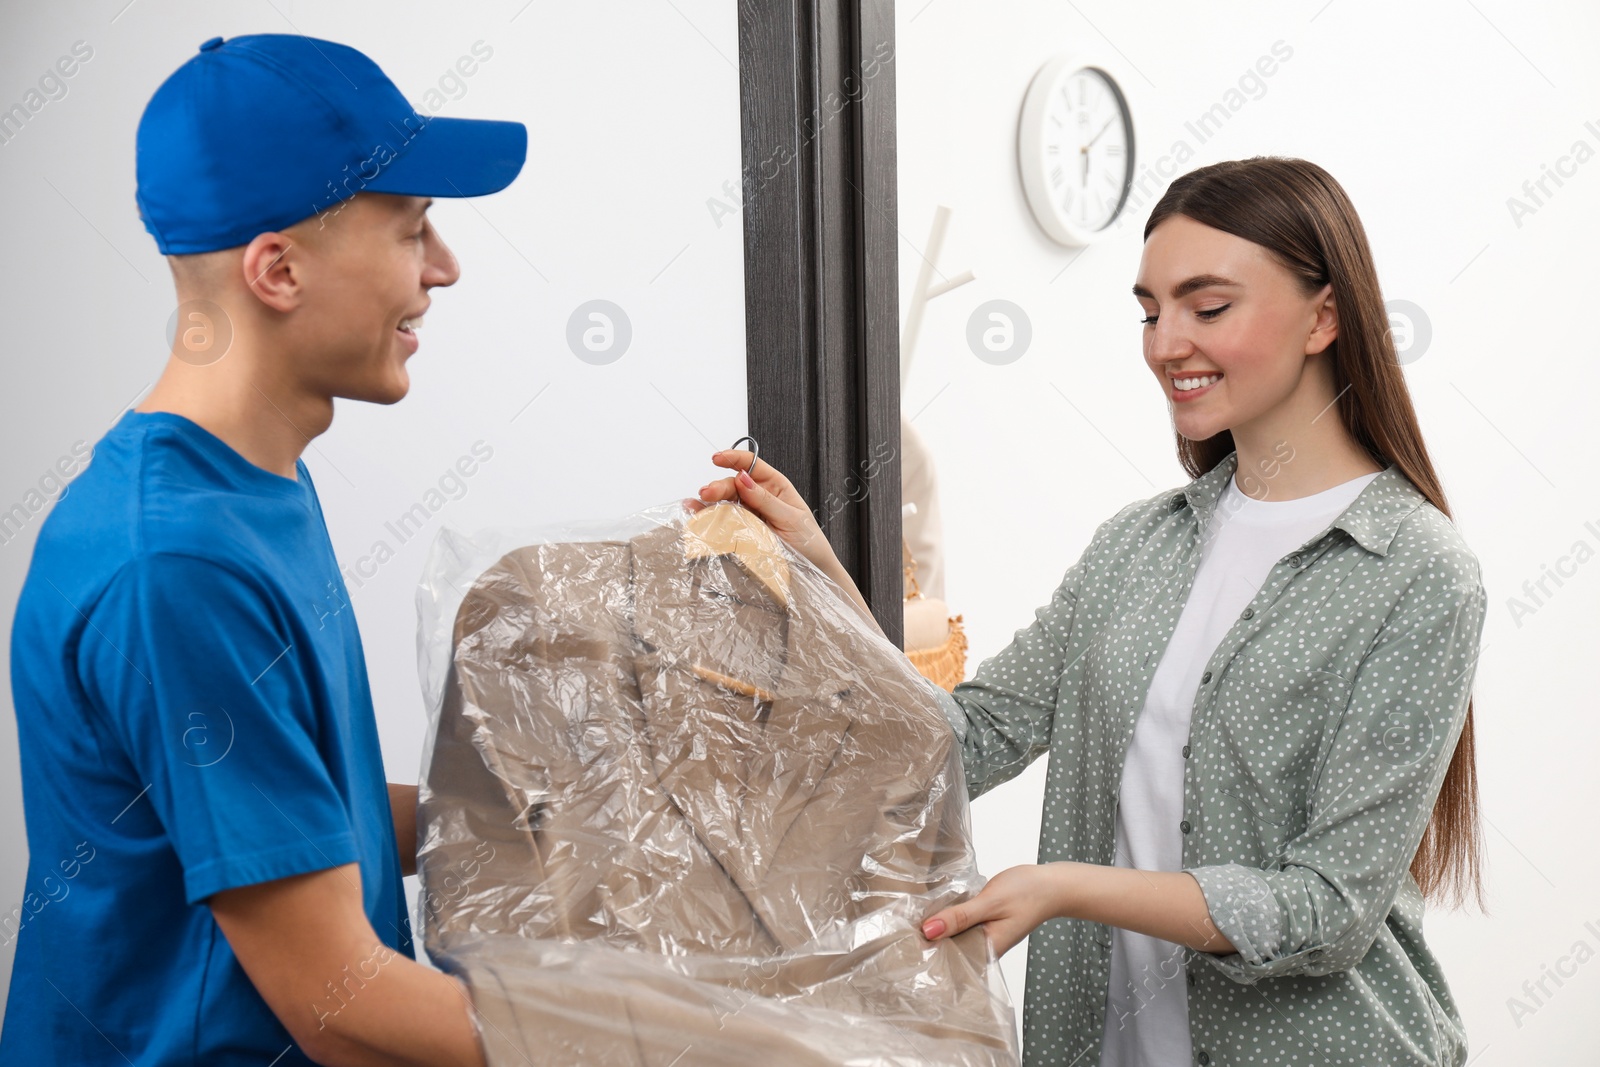 Photo of Dry-cleaning delivery. Courier giving jacket in plastic bag to woman indoors